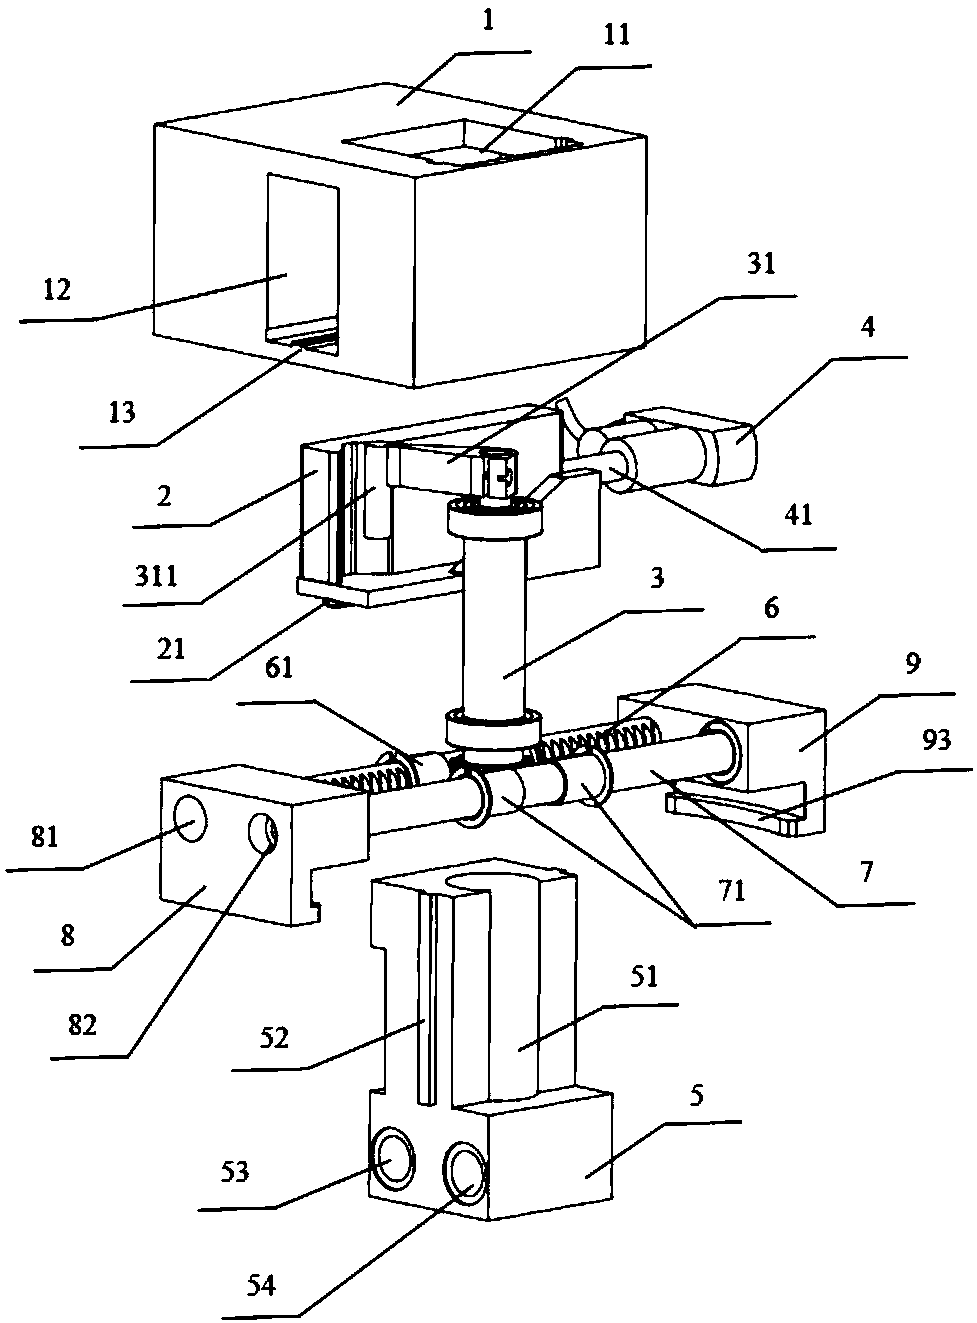 Uncapping hoisting device